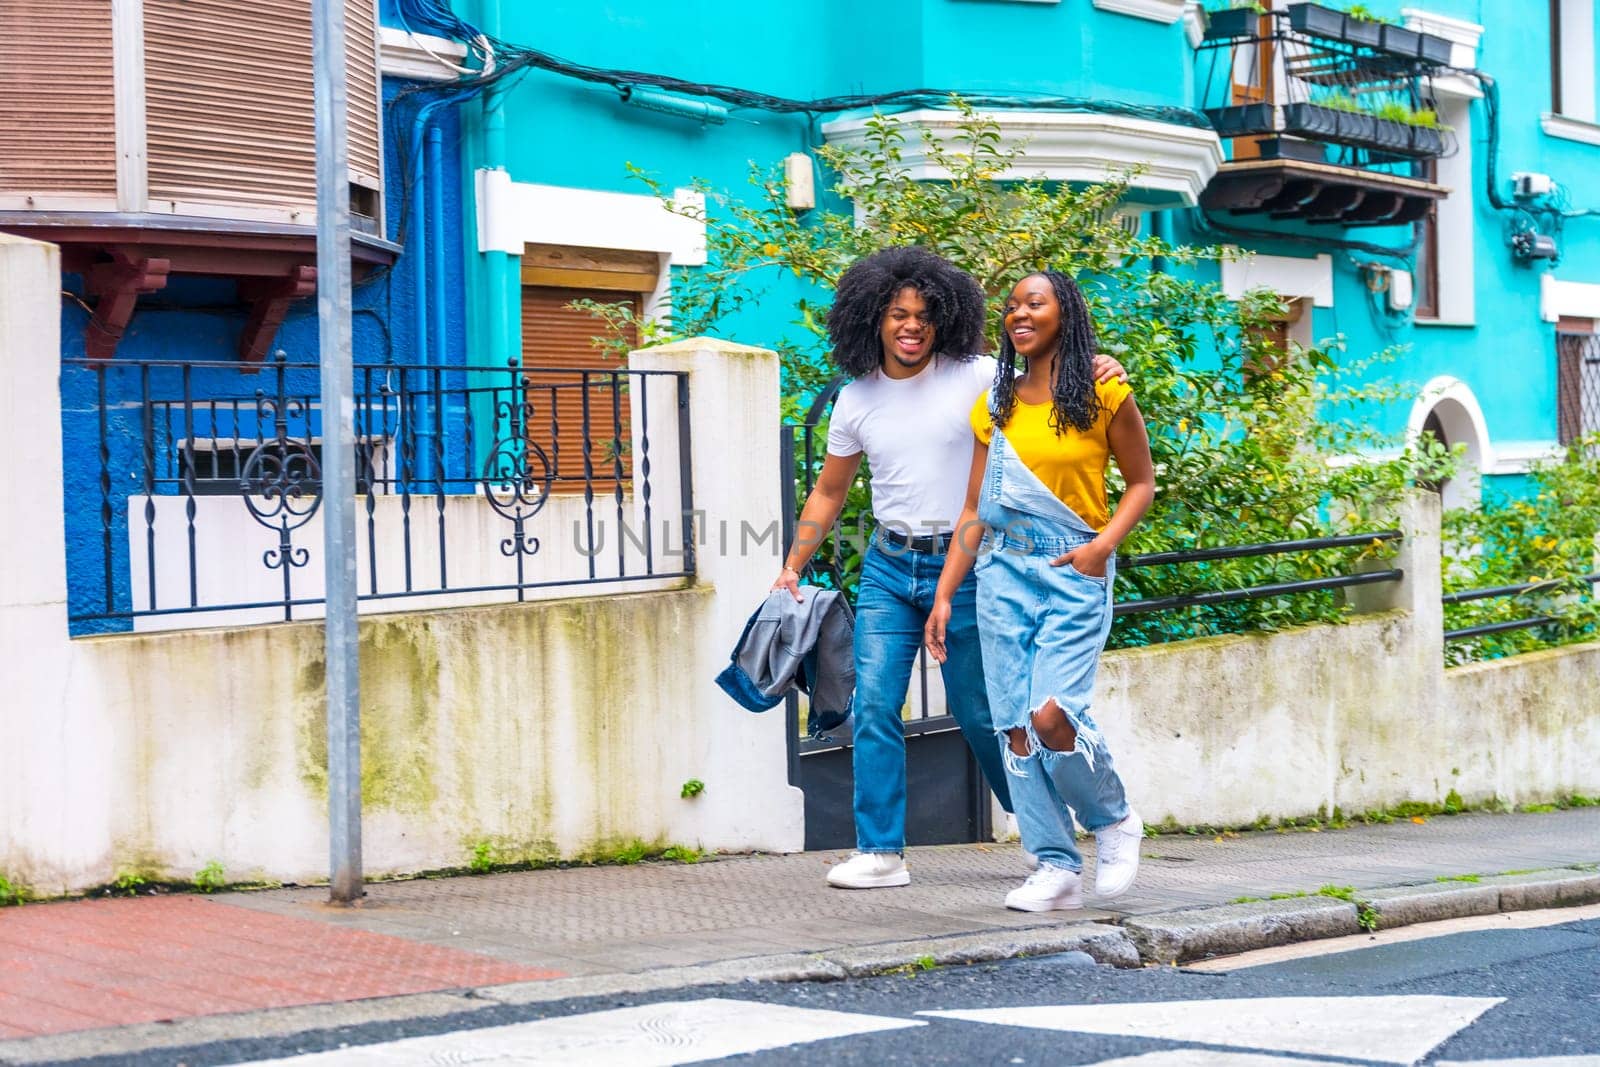 Wide view of a cool young african american couple exploring a city with colorful facades